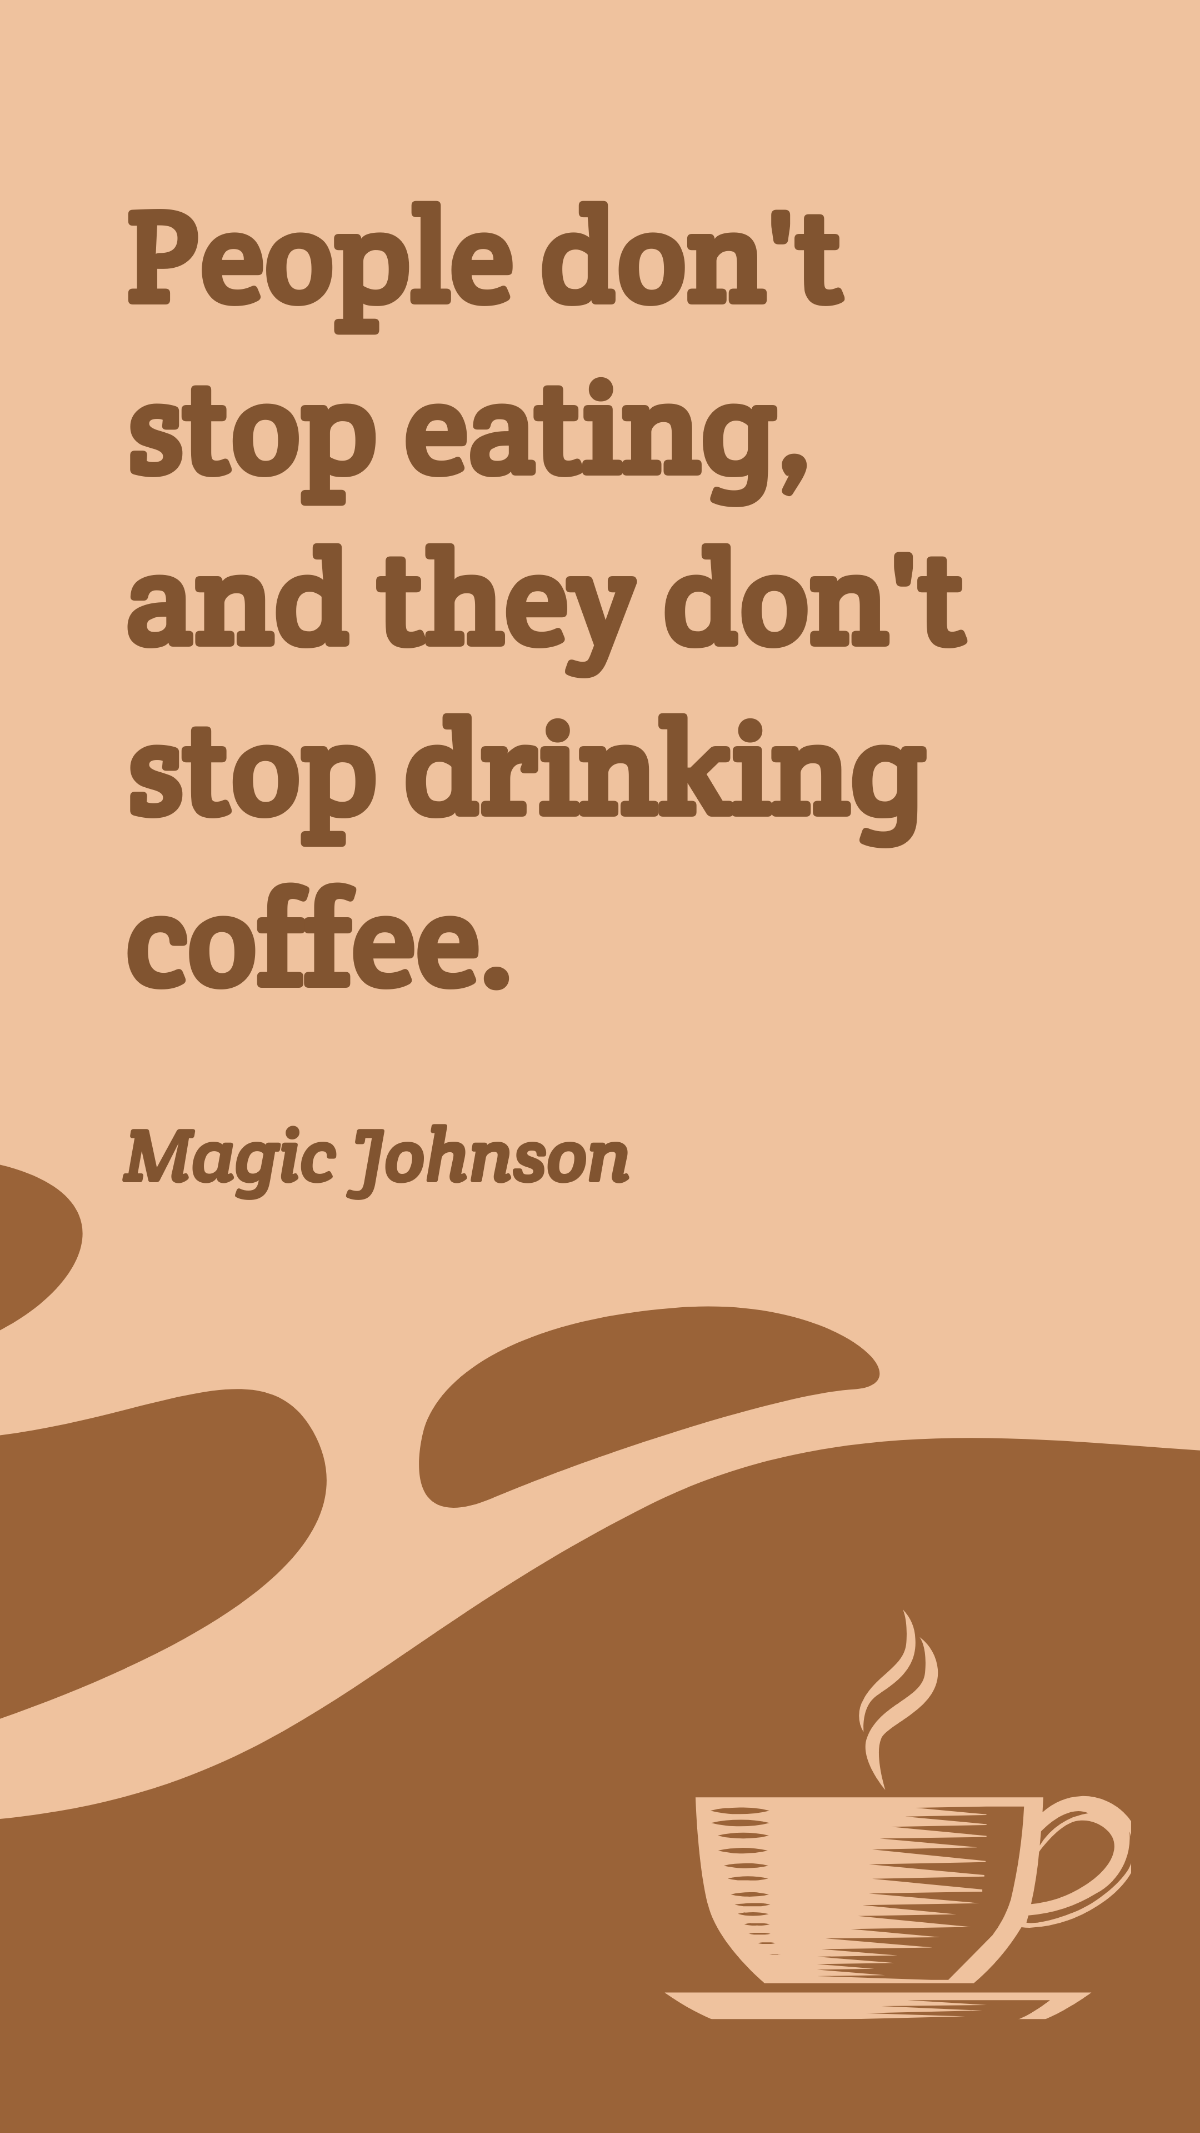 Free Magic Johnson - People don't stop eating, and they don't stop drinking coffee. Template